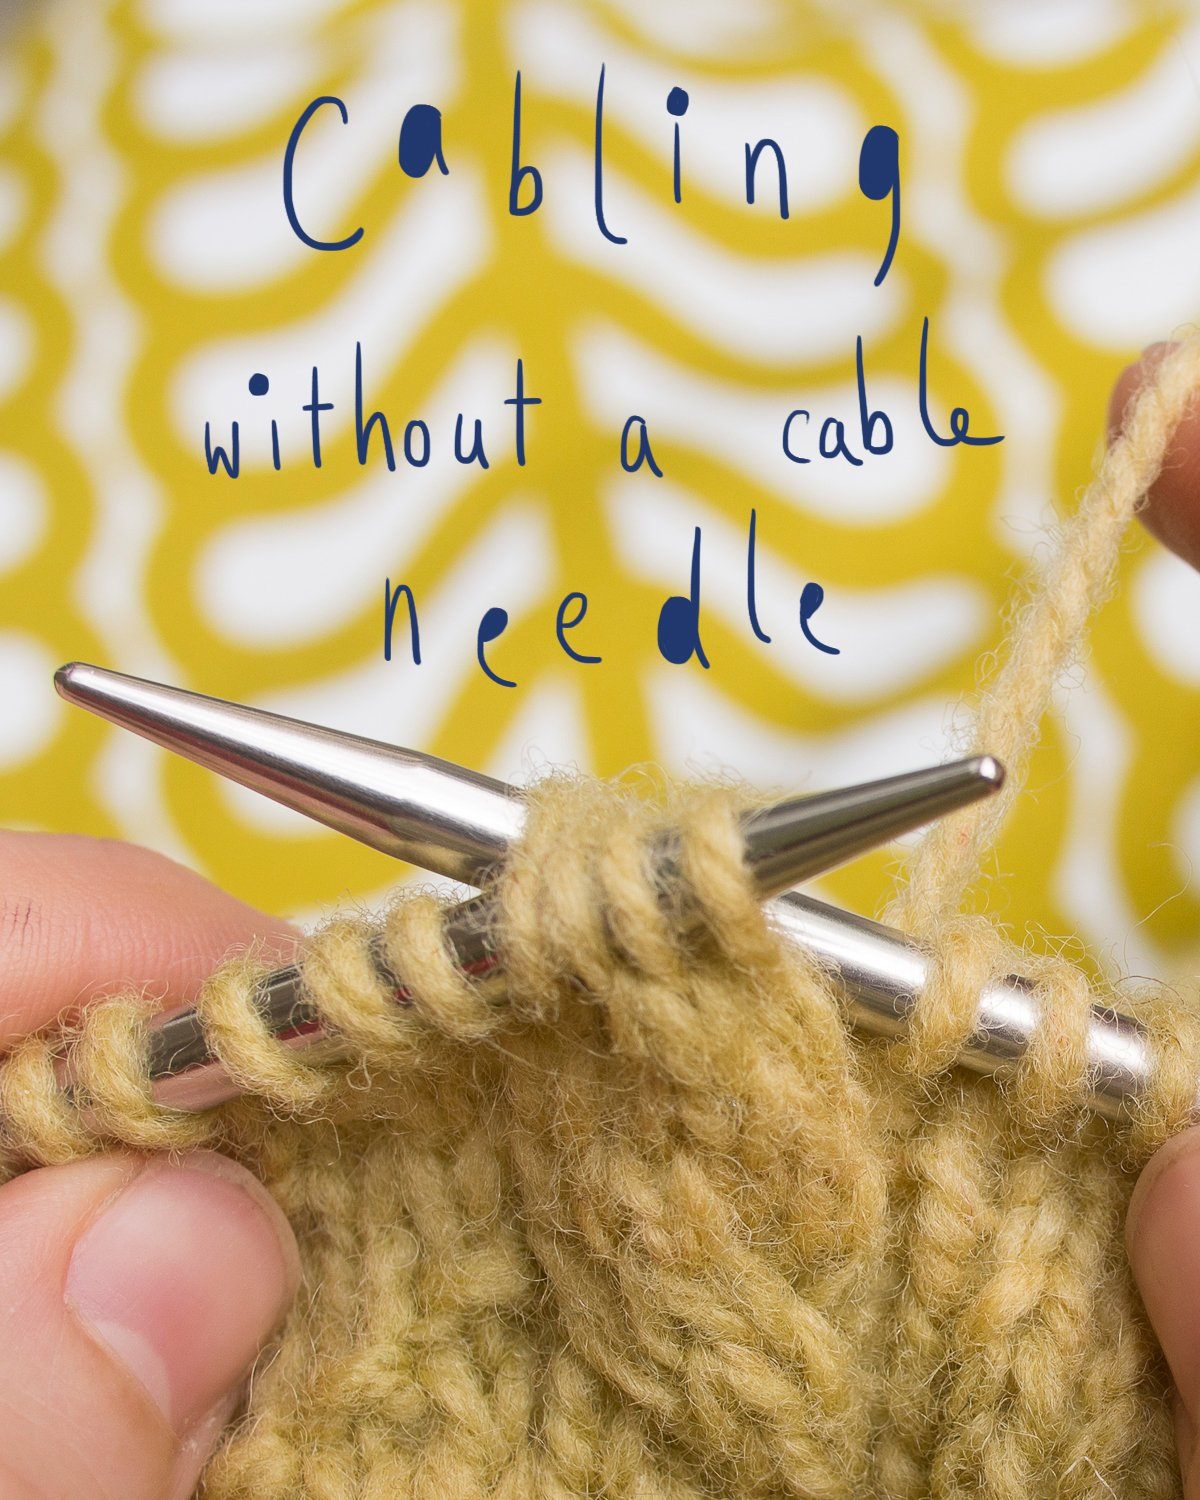 Faster, Easier Cable Knitting: No Cable Needles, No Fear